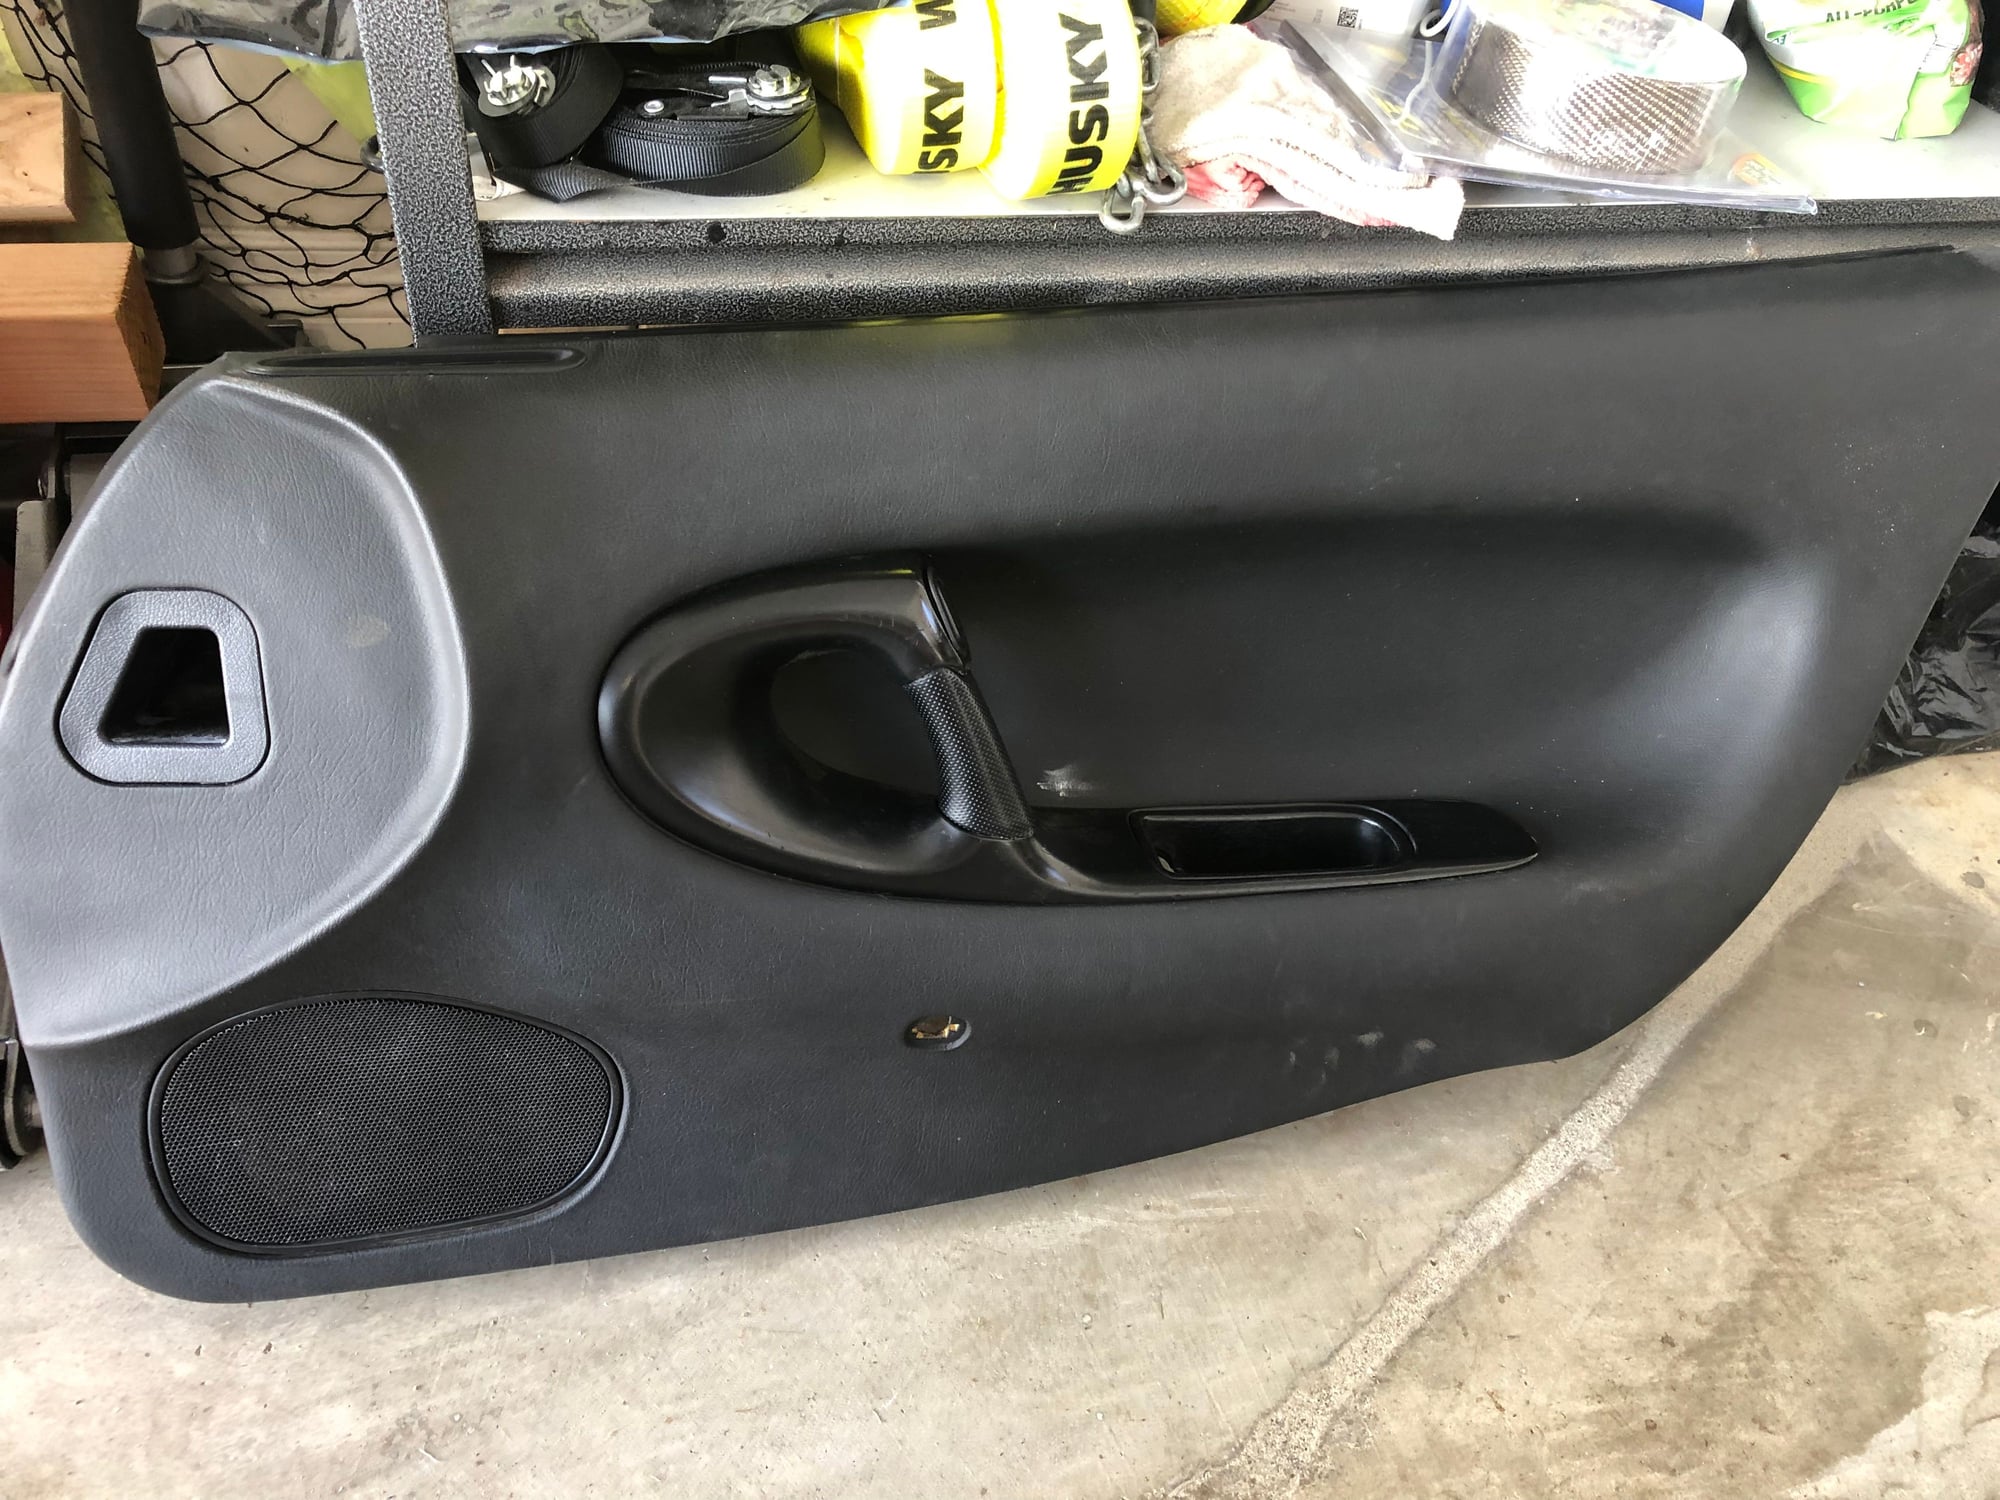 Miscellaneous - Misc Body and Interior Parts - Used - 1993 to 1995 Mazda RX-7 - San Diego, CA 92109, United States